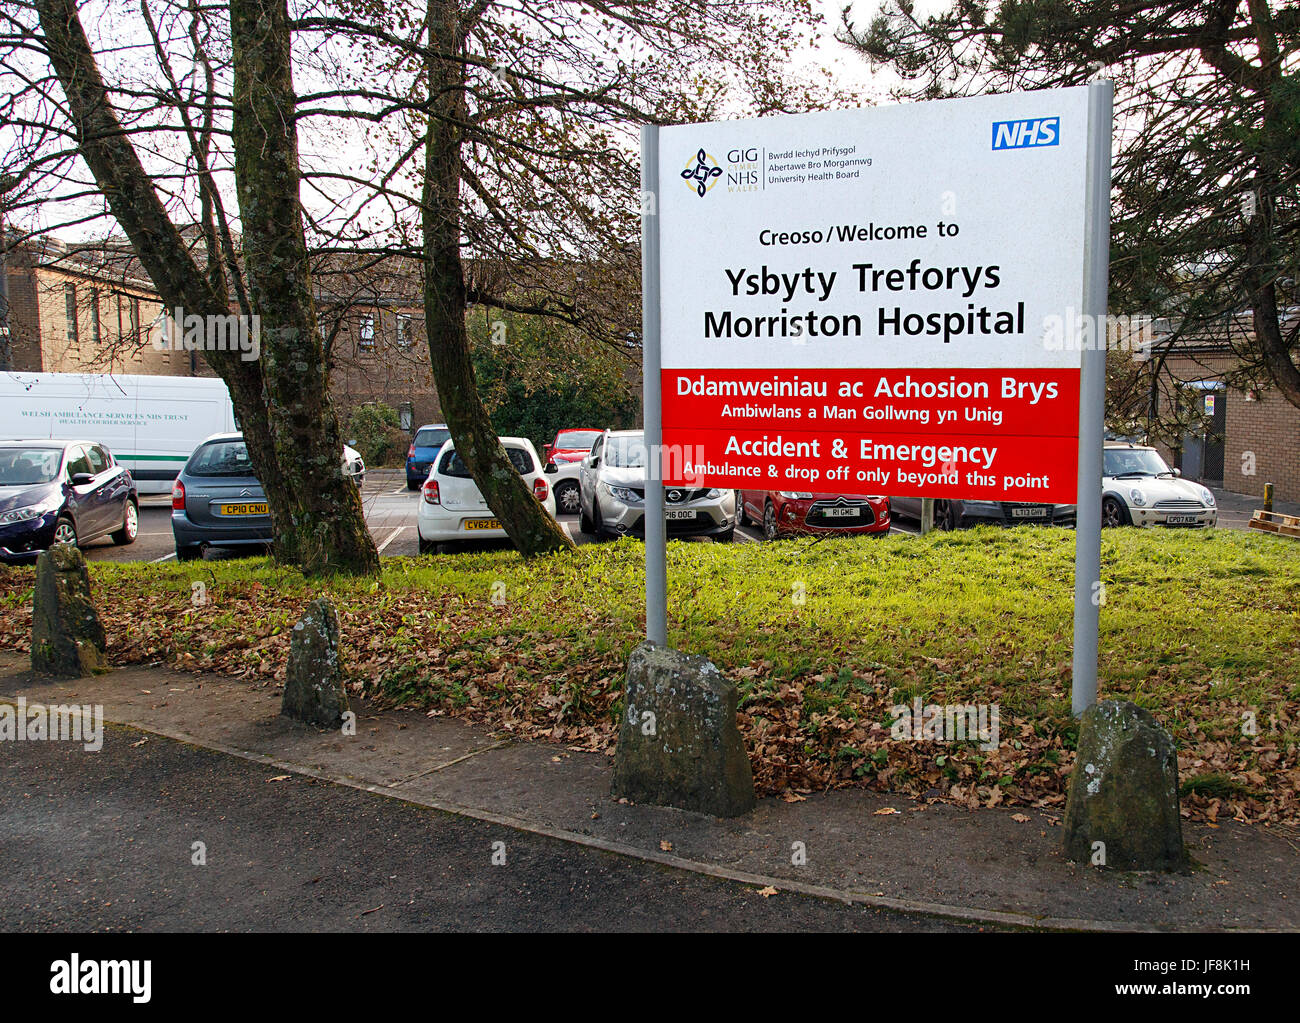 Accident and Emergency - Morriston Hospital Stock Photo